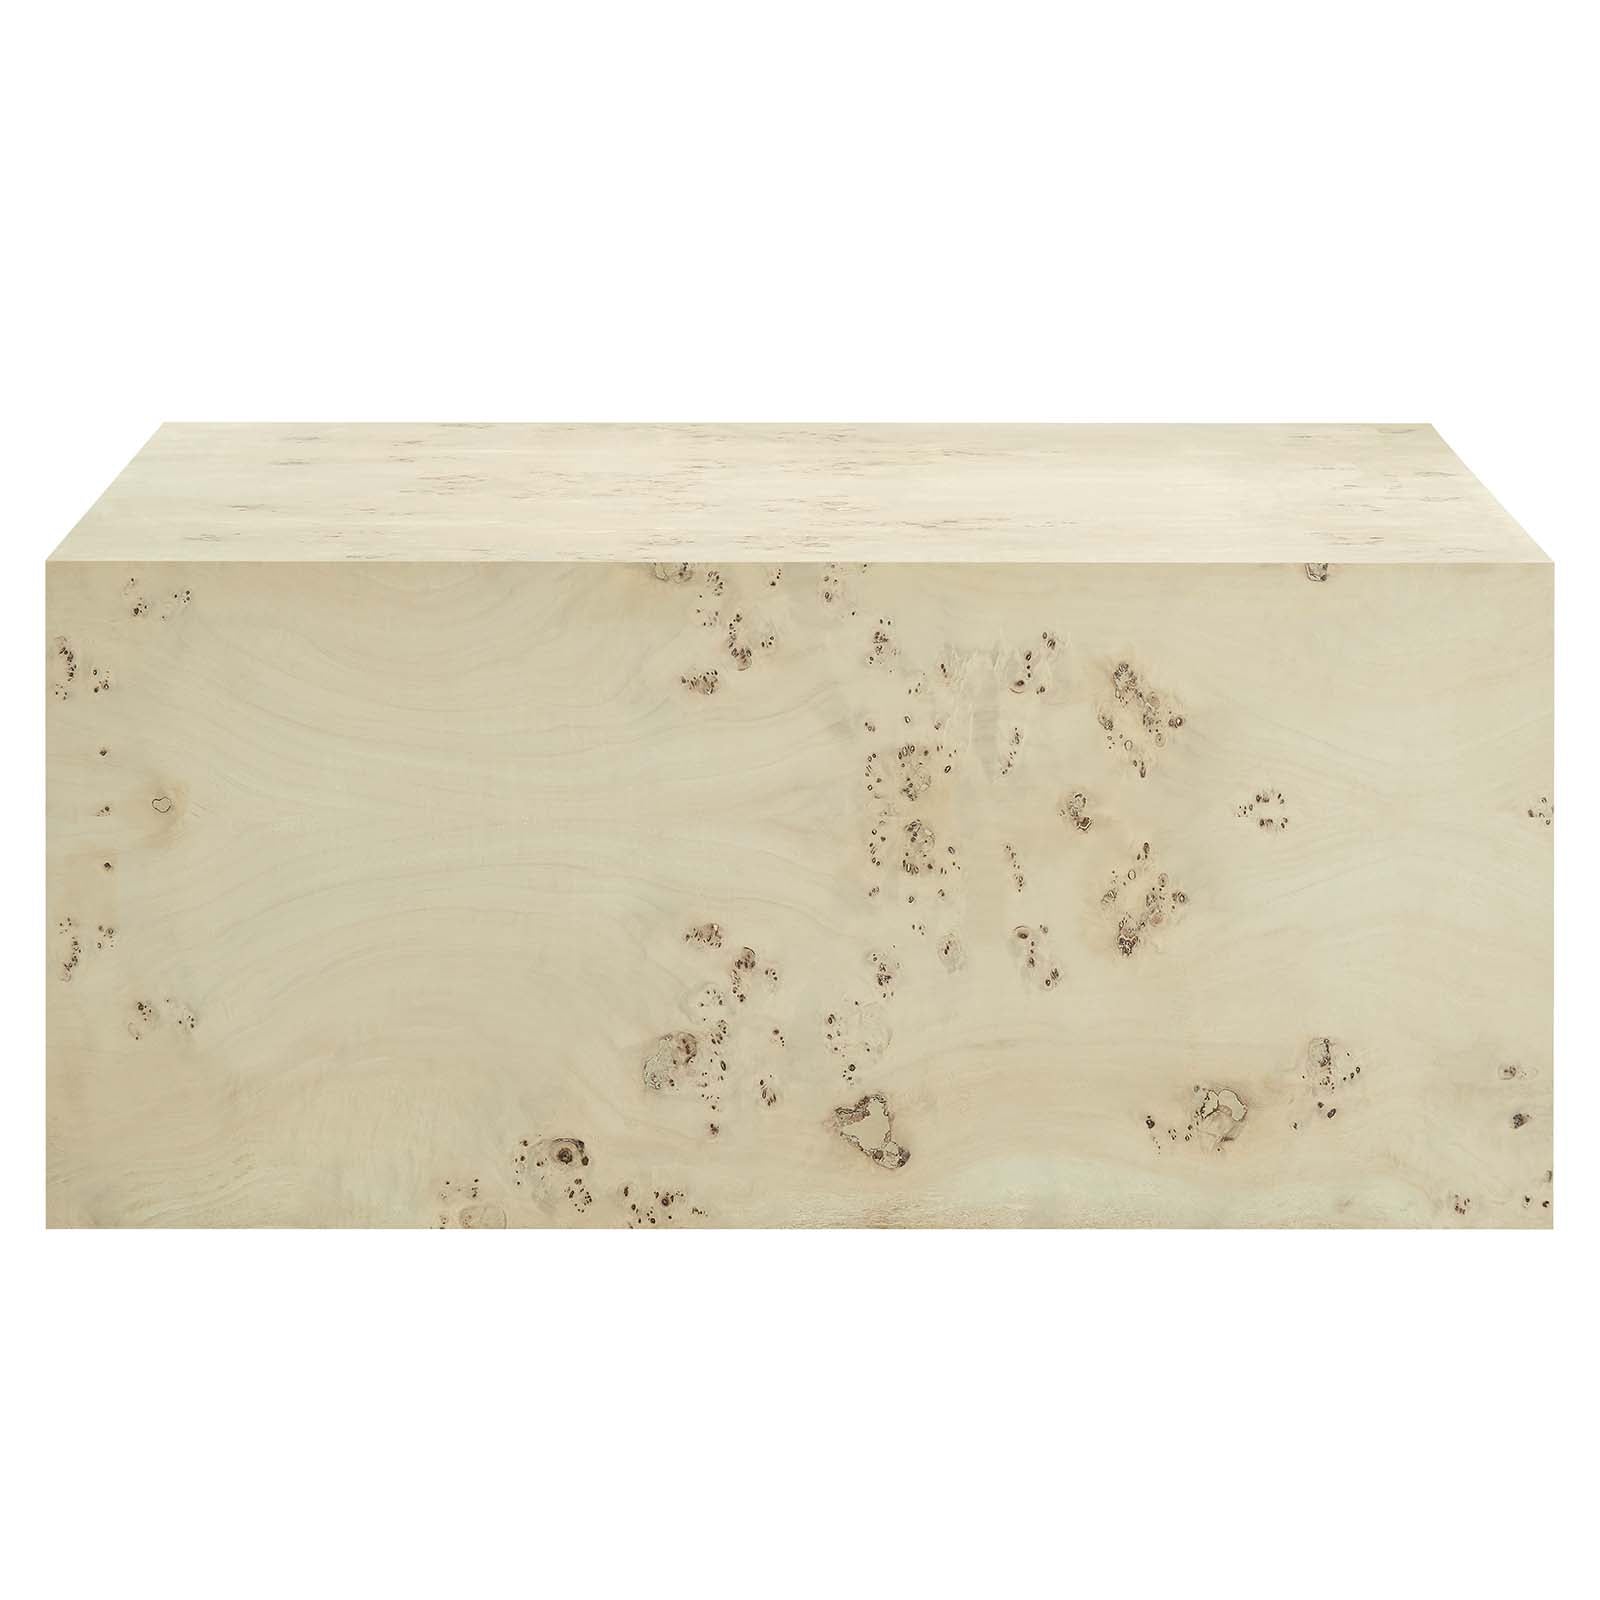 Cosmos 36" Square Burl Wood Coffee Table